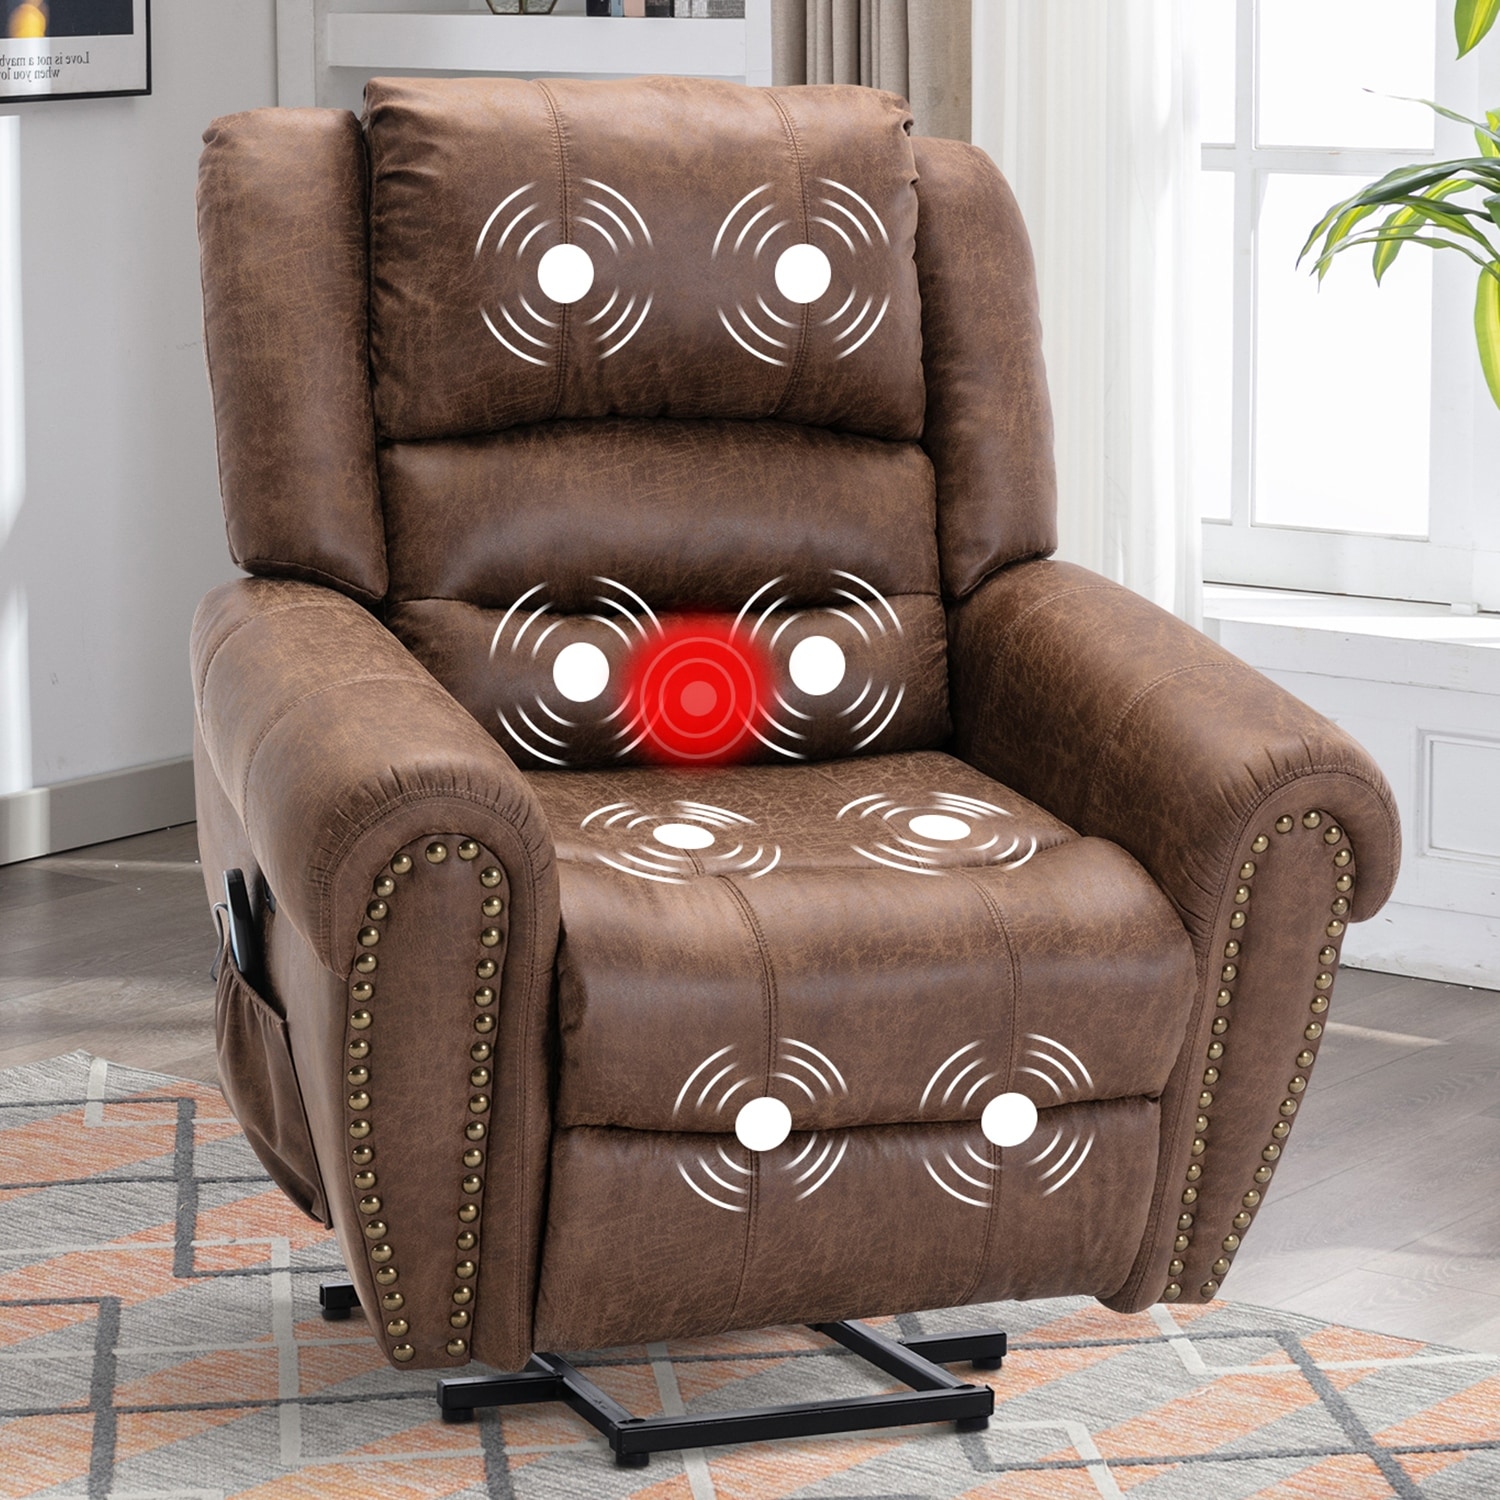 https://ak1.ostkcdn.com/images/products/is/images/direct/6be73c46f21b2cbbe79d5e8eb360c922b44d8246/Breathable-Faux-Leather-Rivet-Power-Lift-Recliner-Chair-with-Massage-and-Heat-and-USB-Port.jpg